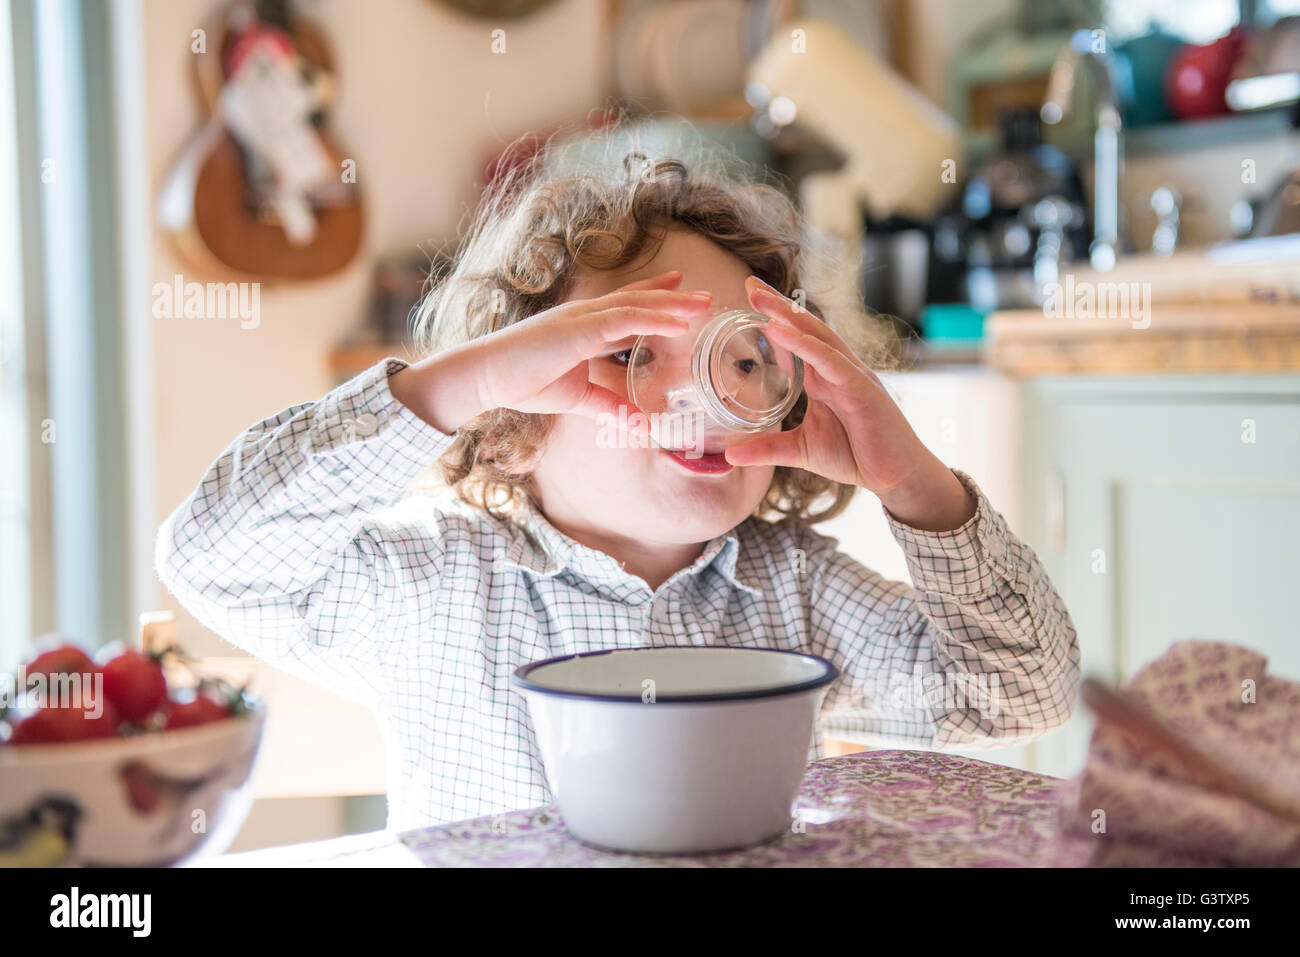 A four year old boy sitting at the kitchen table drinking from a glass. Stock Photo